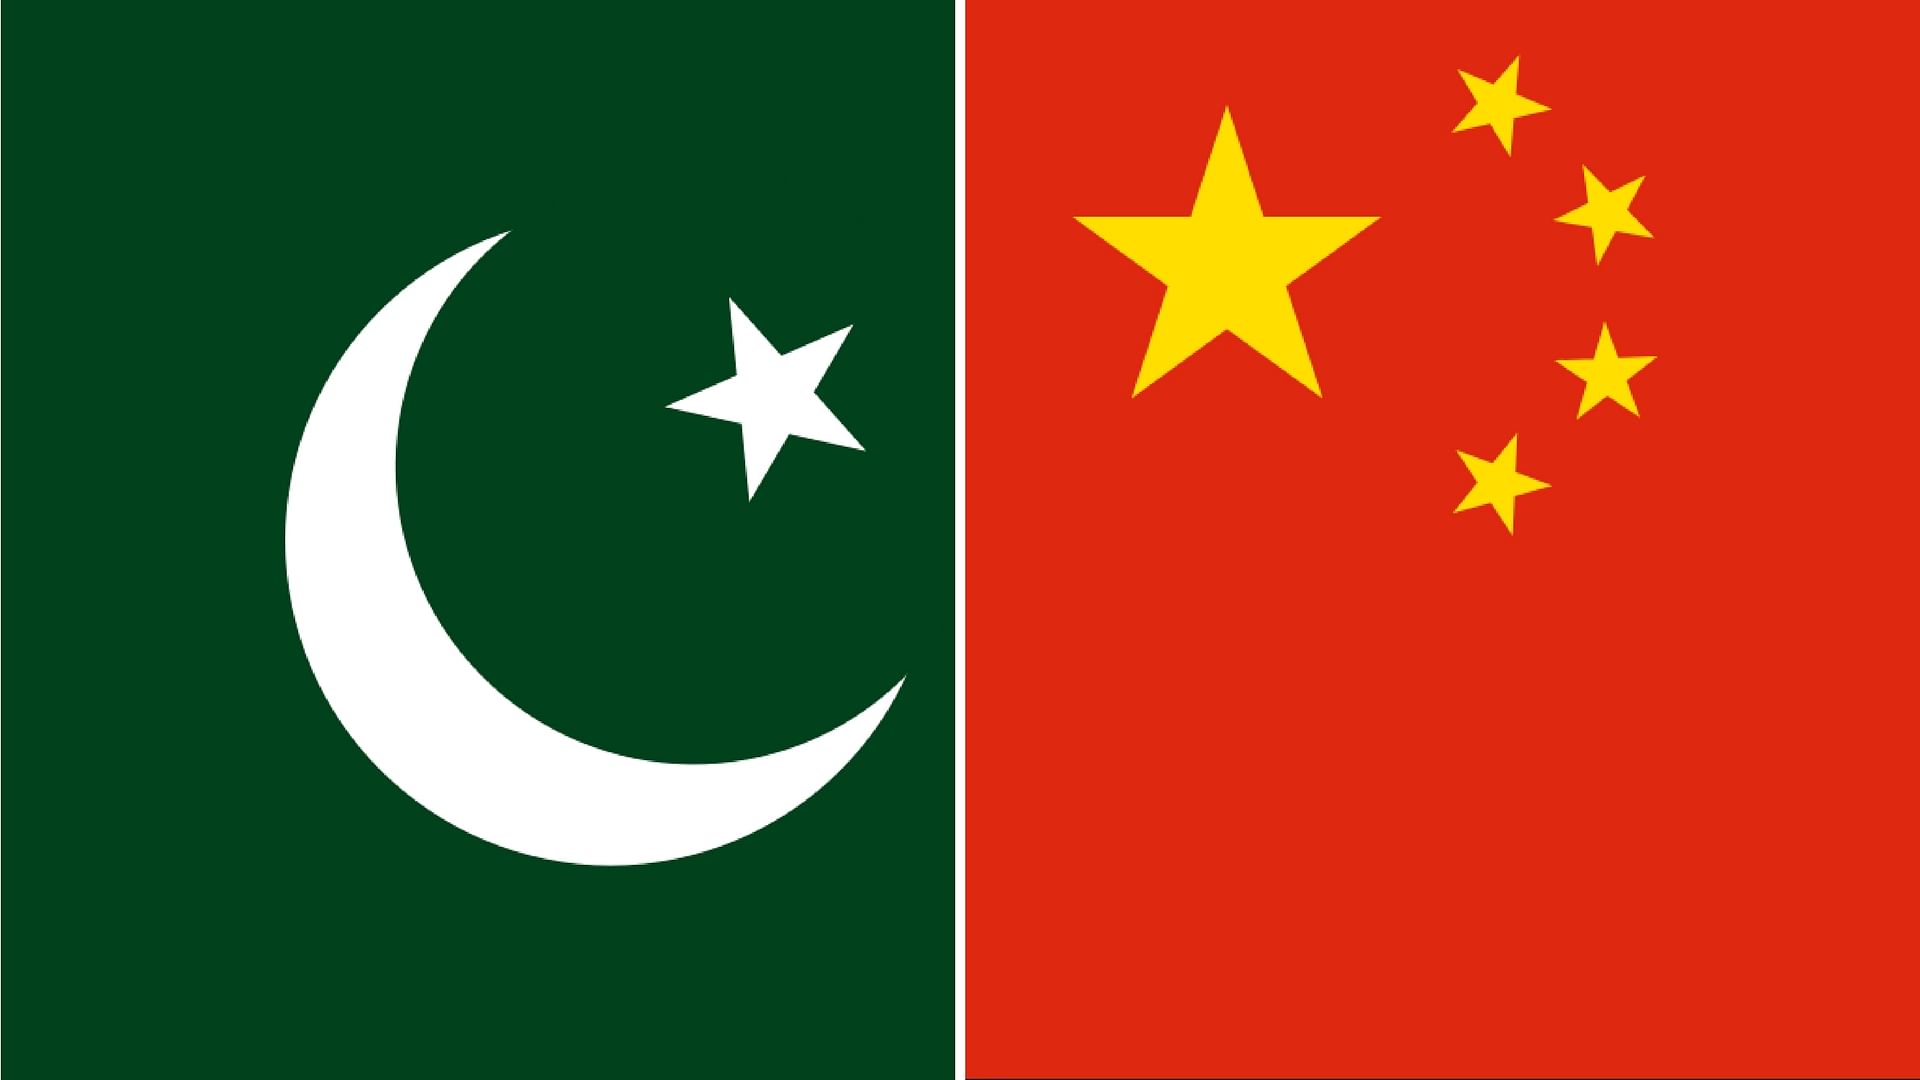 <div class="paragraphs"><p>In a sharp reaction, External Affairs Ministry Spokesperson Arindam Bagchi said such activities under the <a href="https://www.thequint.com/topic/china-pakistan-economic-corridor-cpec">China-Pakistan Economic Corridor (CPEC)</a> are "inherently illegal, illegitimate and unacceptable", and will be treated accordingly by India.</p></div>